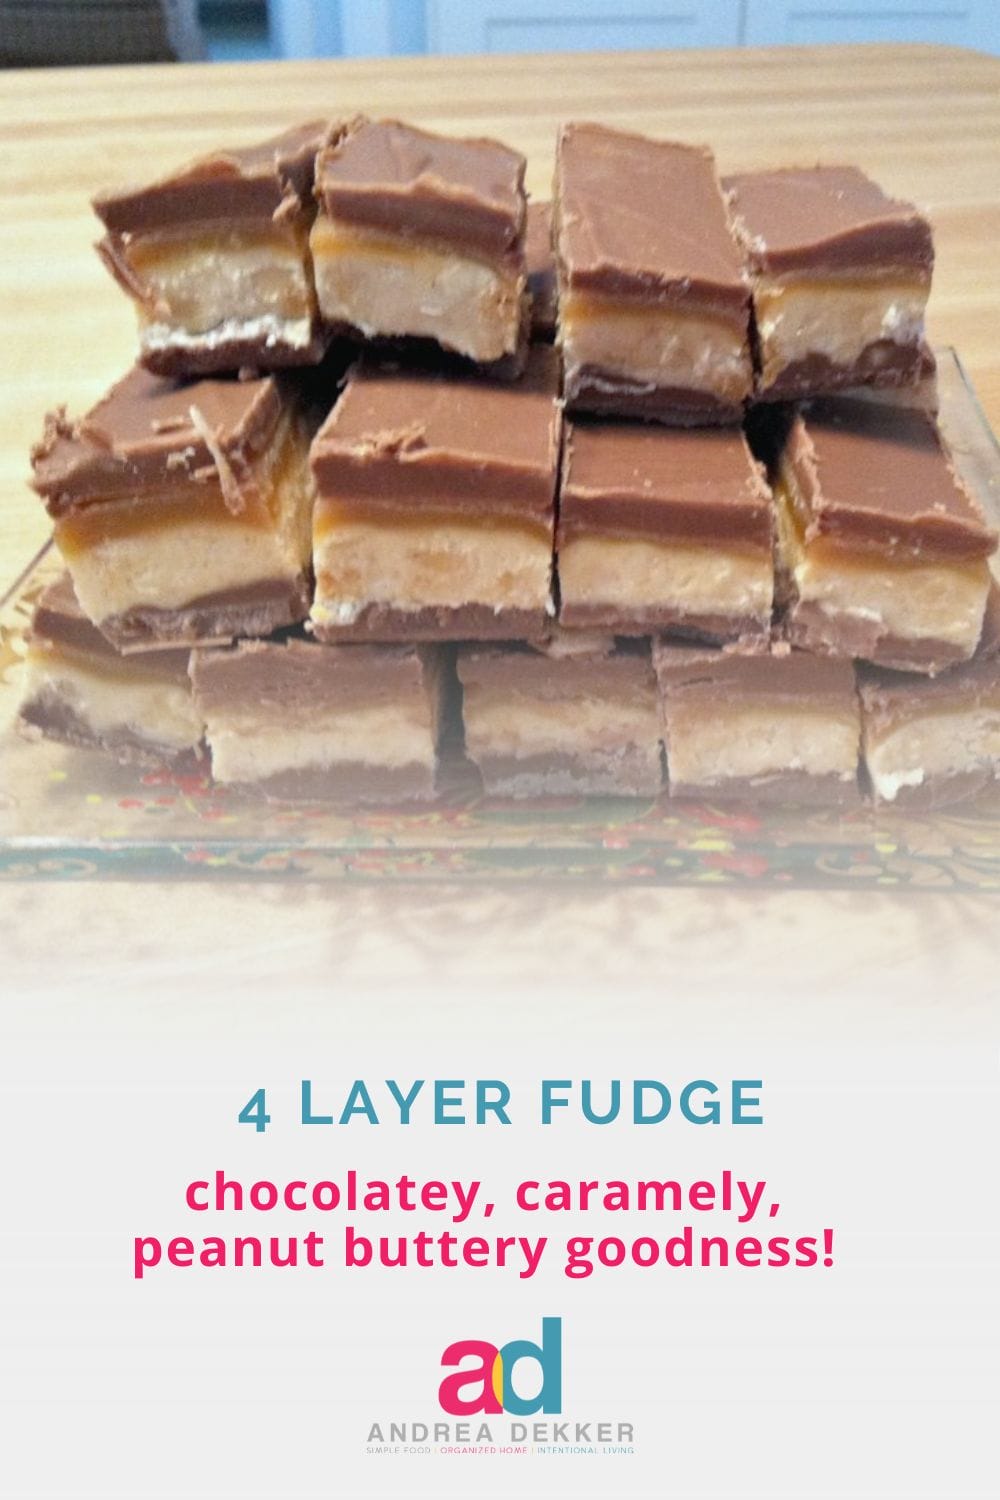 If you're looking for a yummy treat to satisfy your sweet tooth this holiday season -- try my 4-layer caramel peanut butter fudge! via @andreadekker